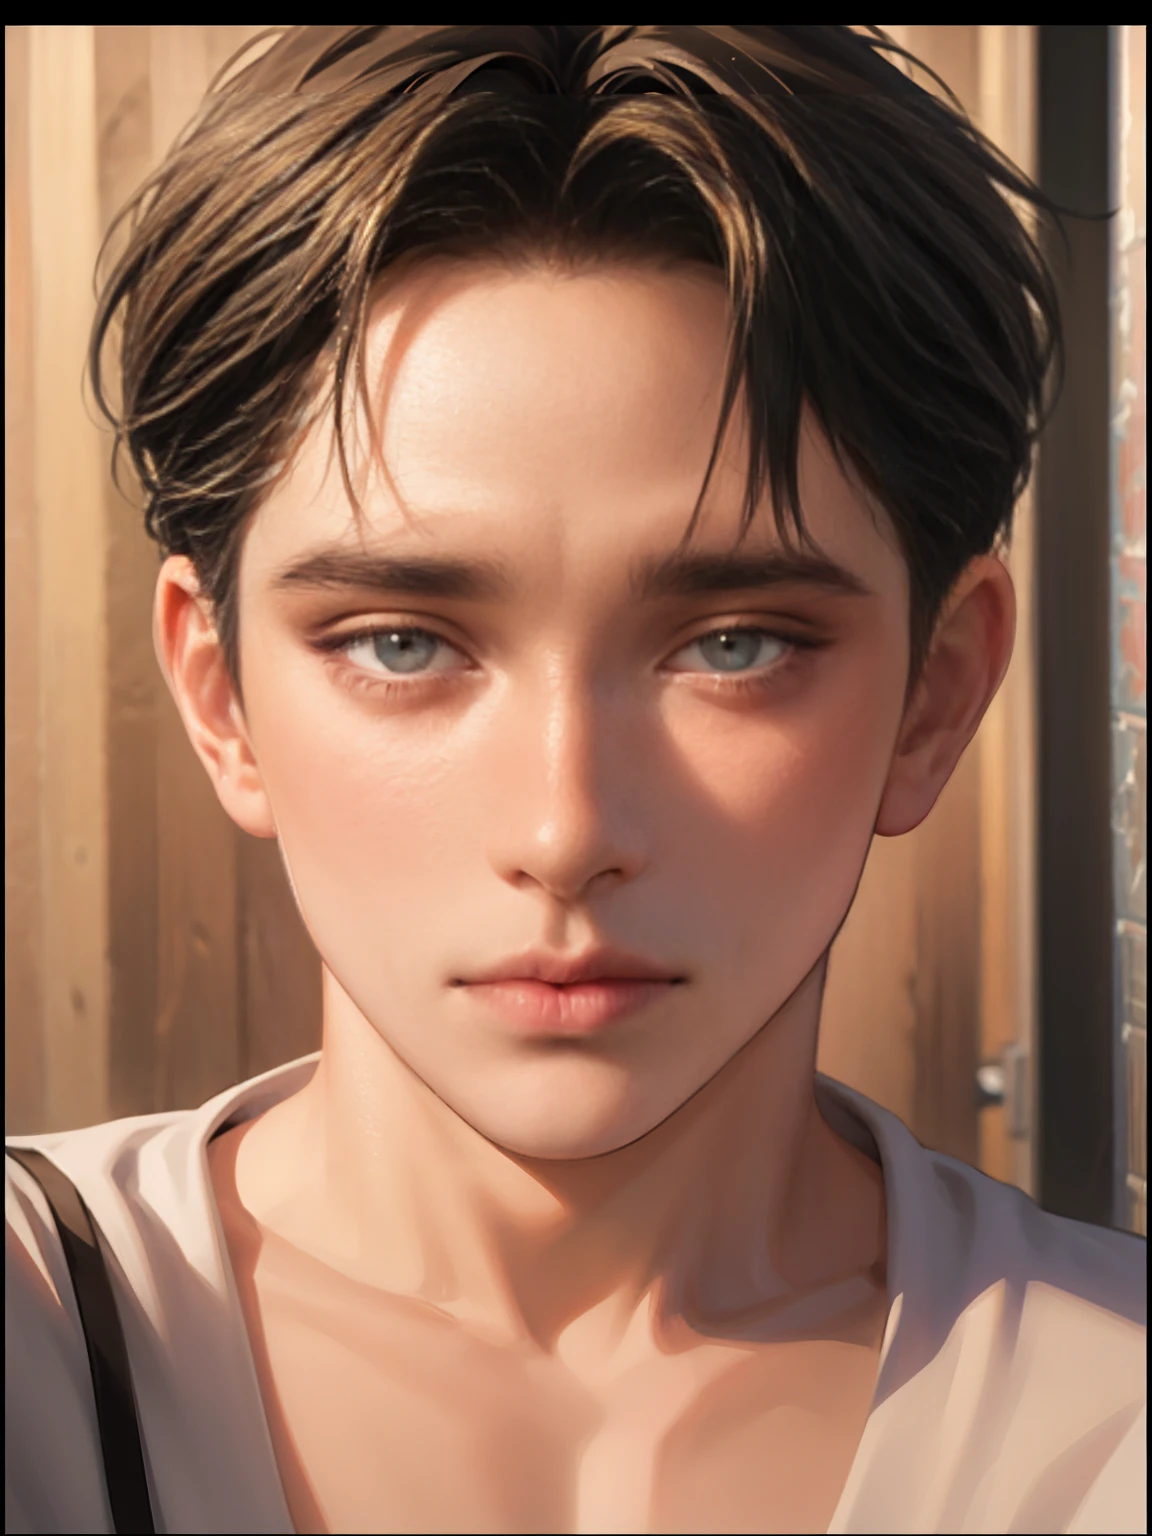 8K, best quality, masterpiece, Ultra-high resolution, (realism: 1.4), original photo, (Realistic skin texture: 1.3), (Film Grain: 1.3), (Selfie Angle), 1 boy, Beautiful eyes and face details, masterpiece, best quality, close up, Upper Body, Looking at the audience